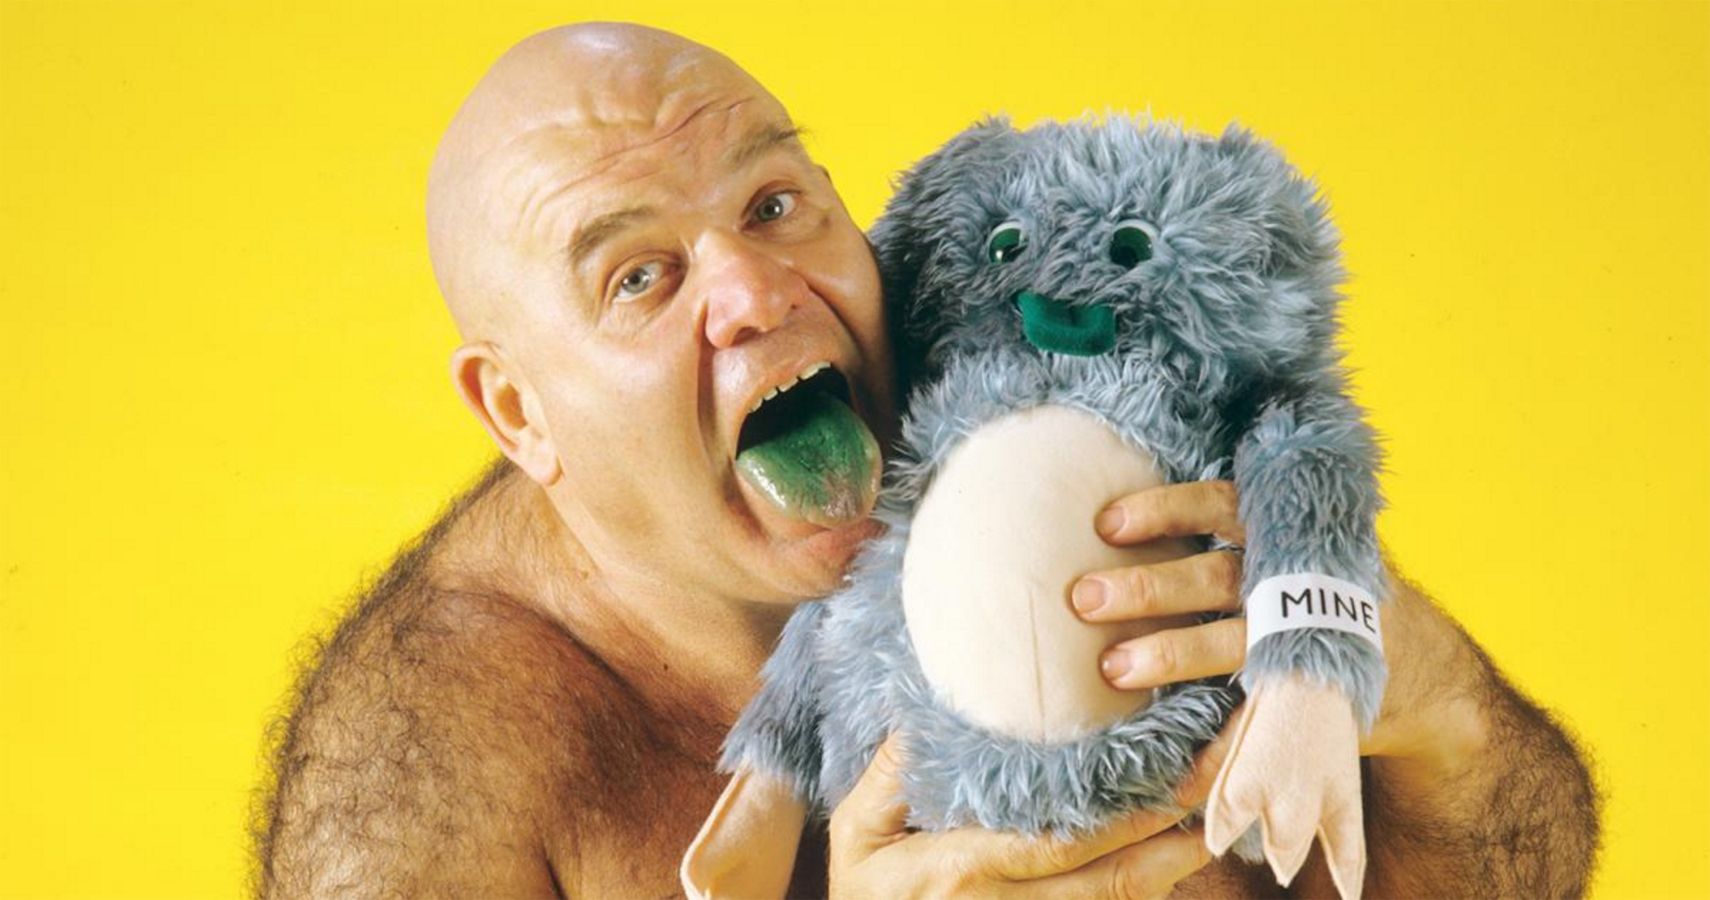 George "The Animal" Steele came to the ring with his stuffed animal, "Mine"